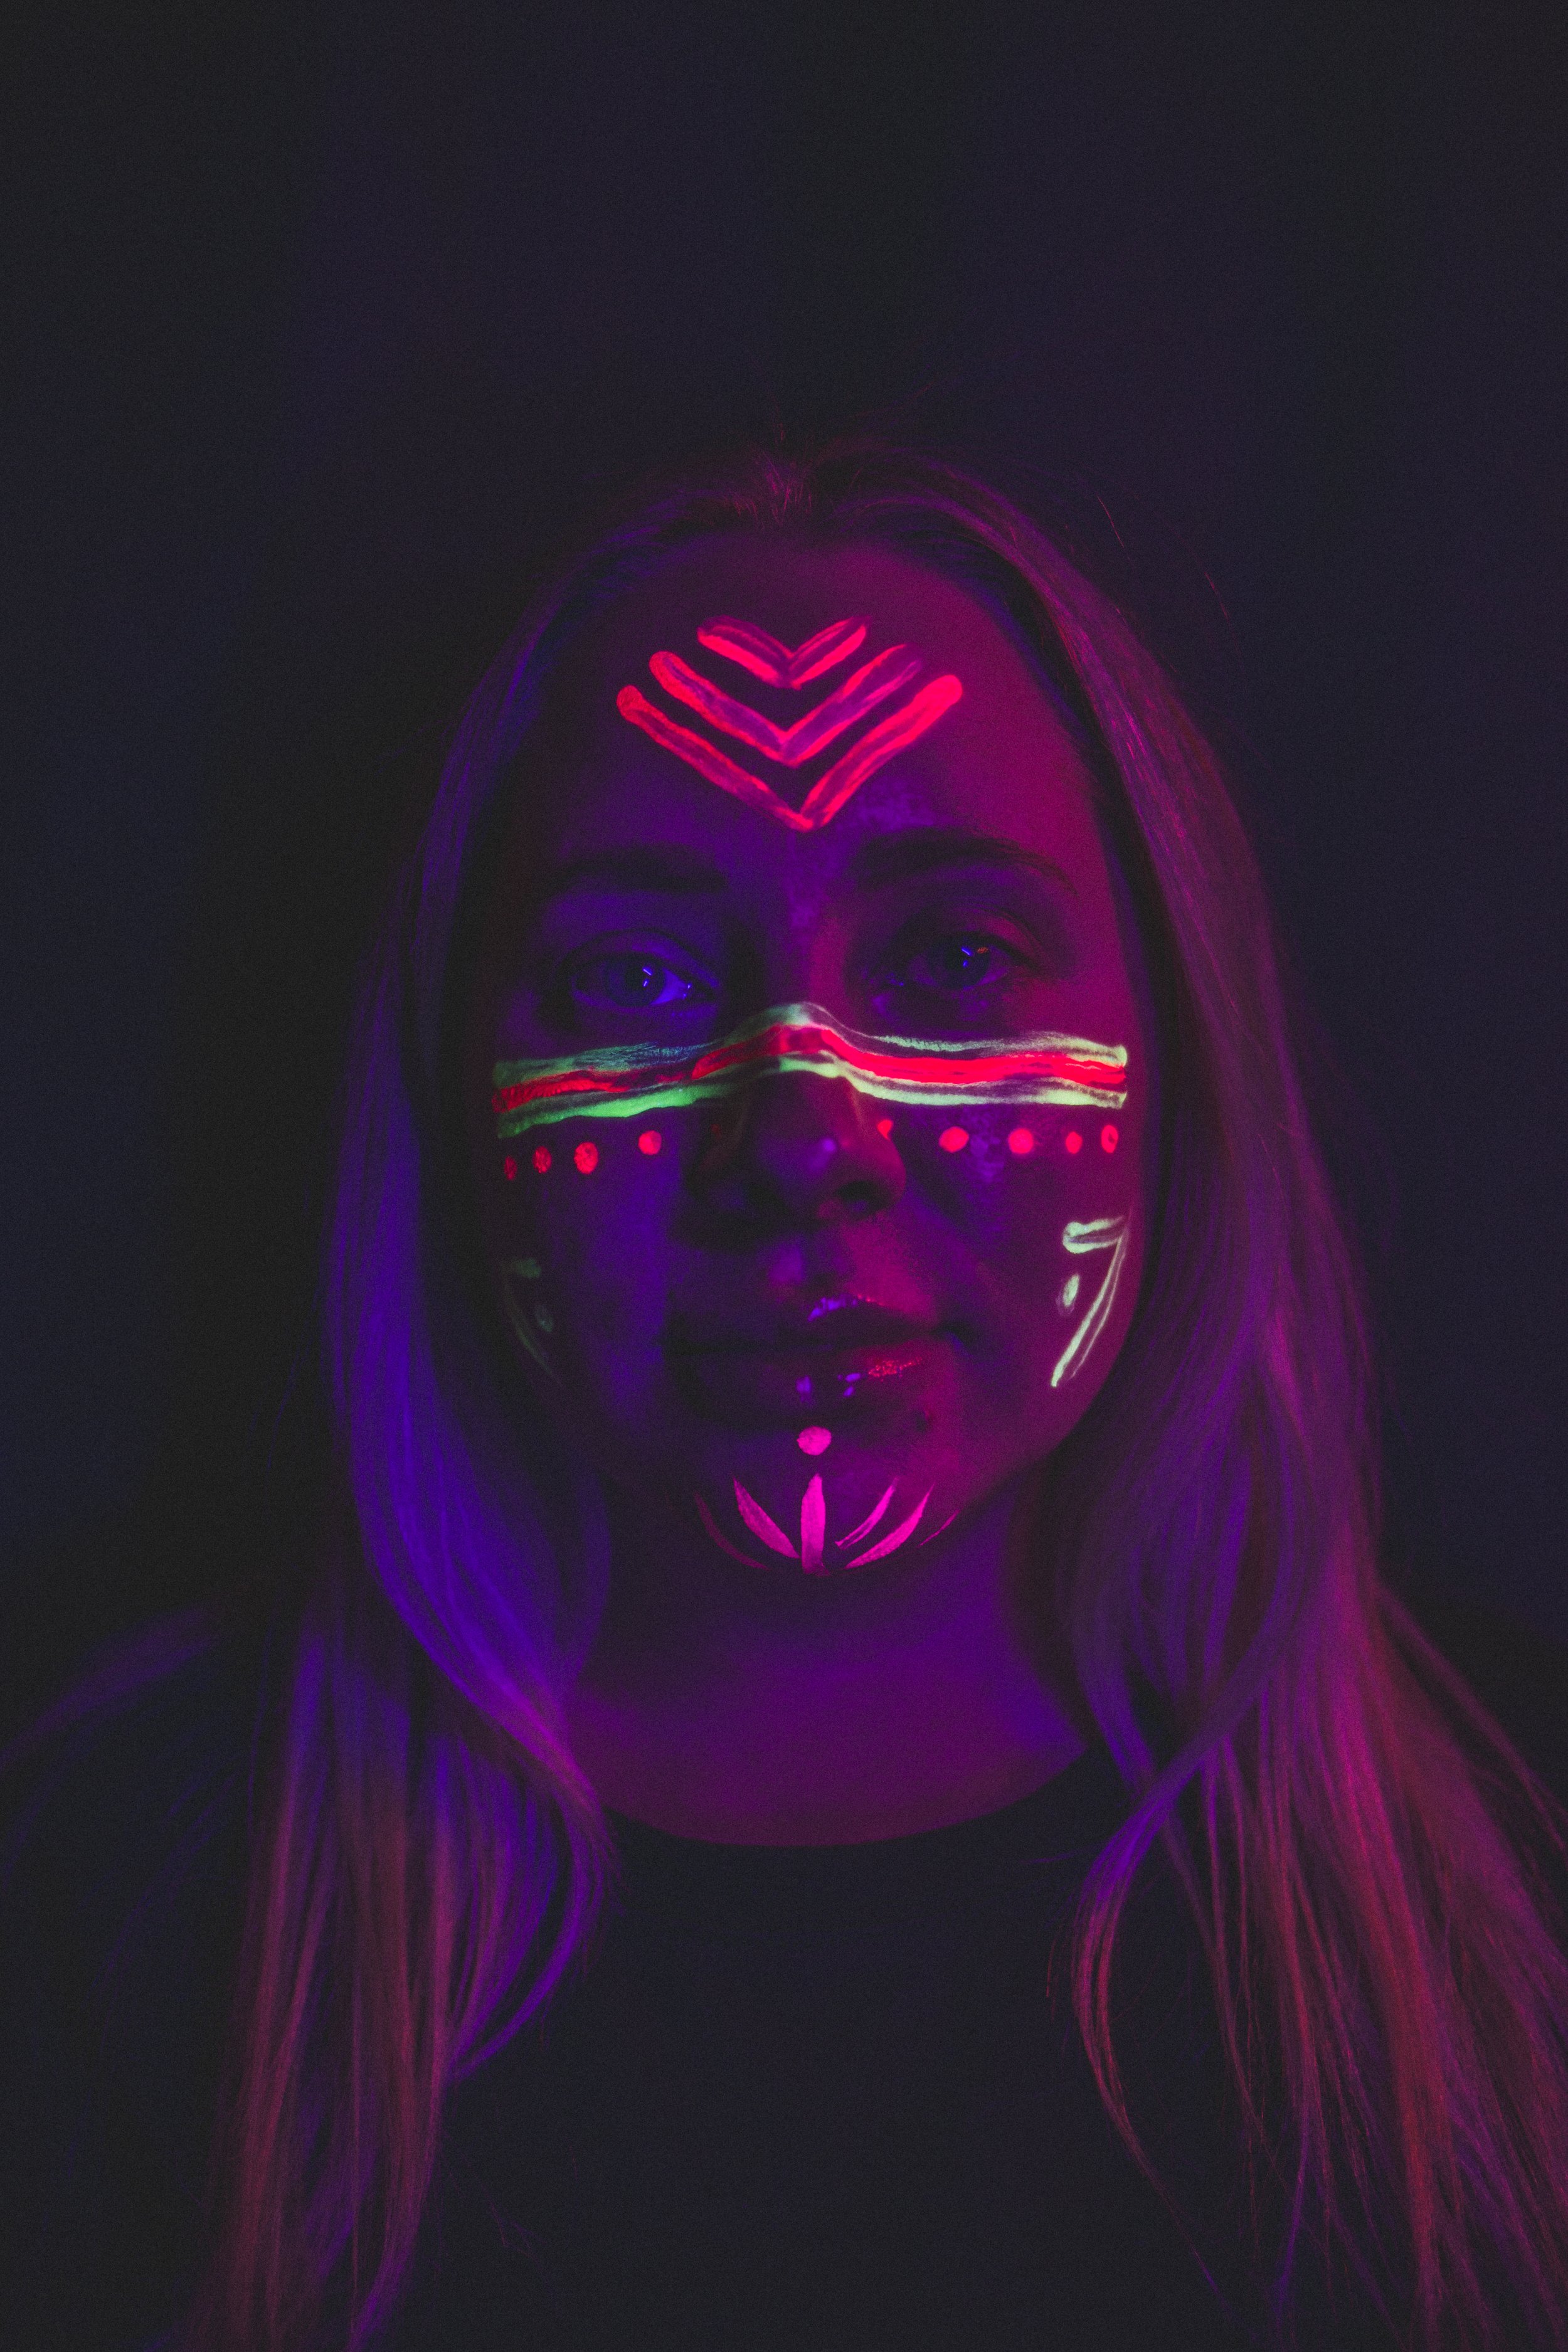 Woman poses with trendy neon body paint on their face for alternative neon body painting creative photoshoot by phoenix body artist, La Luna Henna and photographer Jennifer Lind Schutsky.